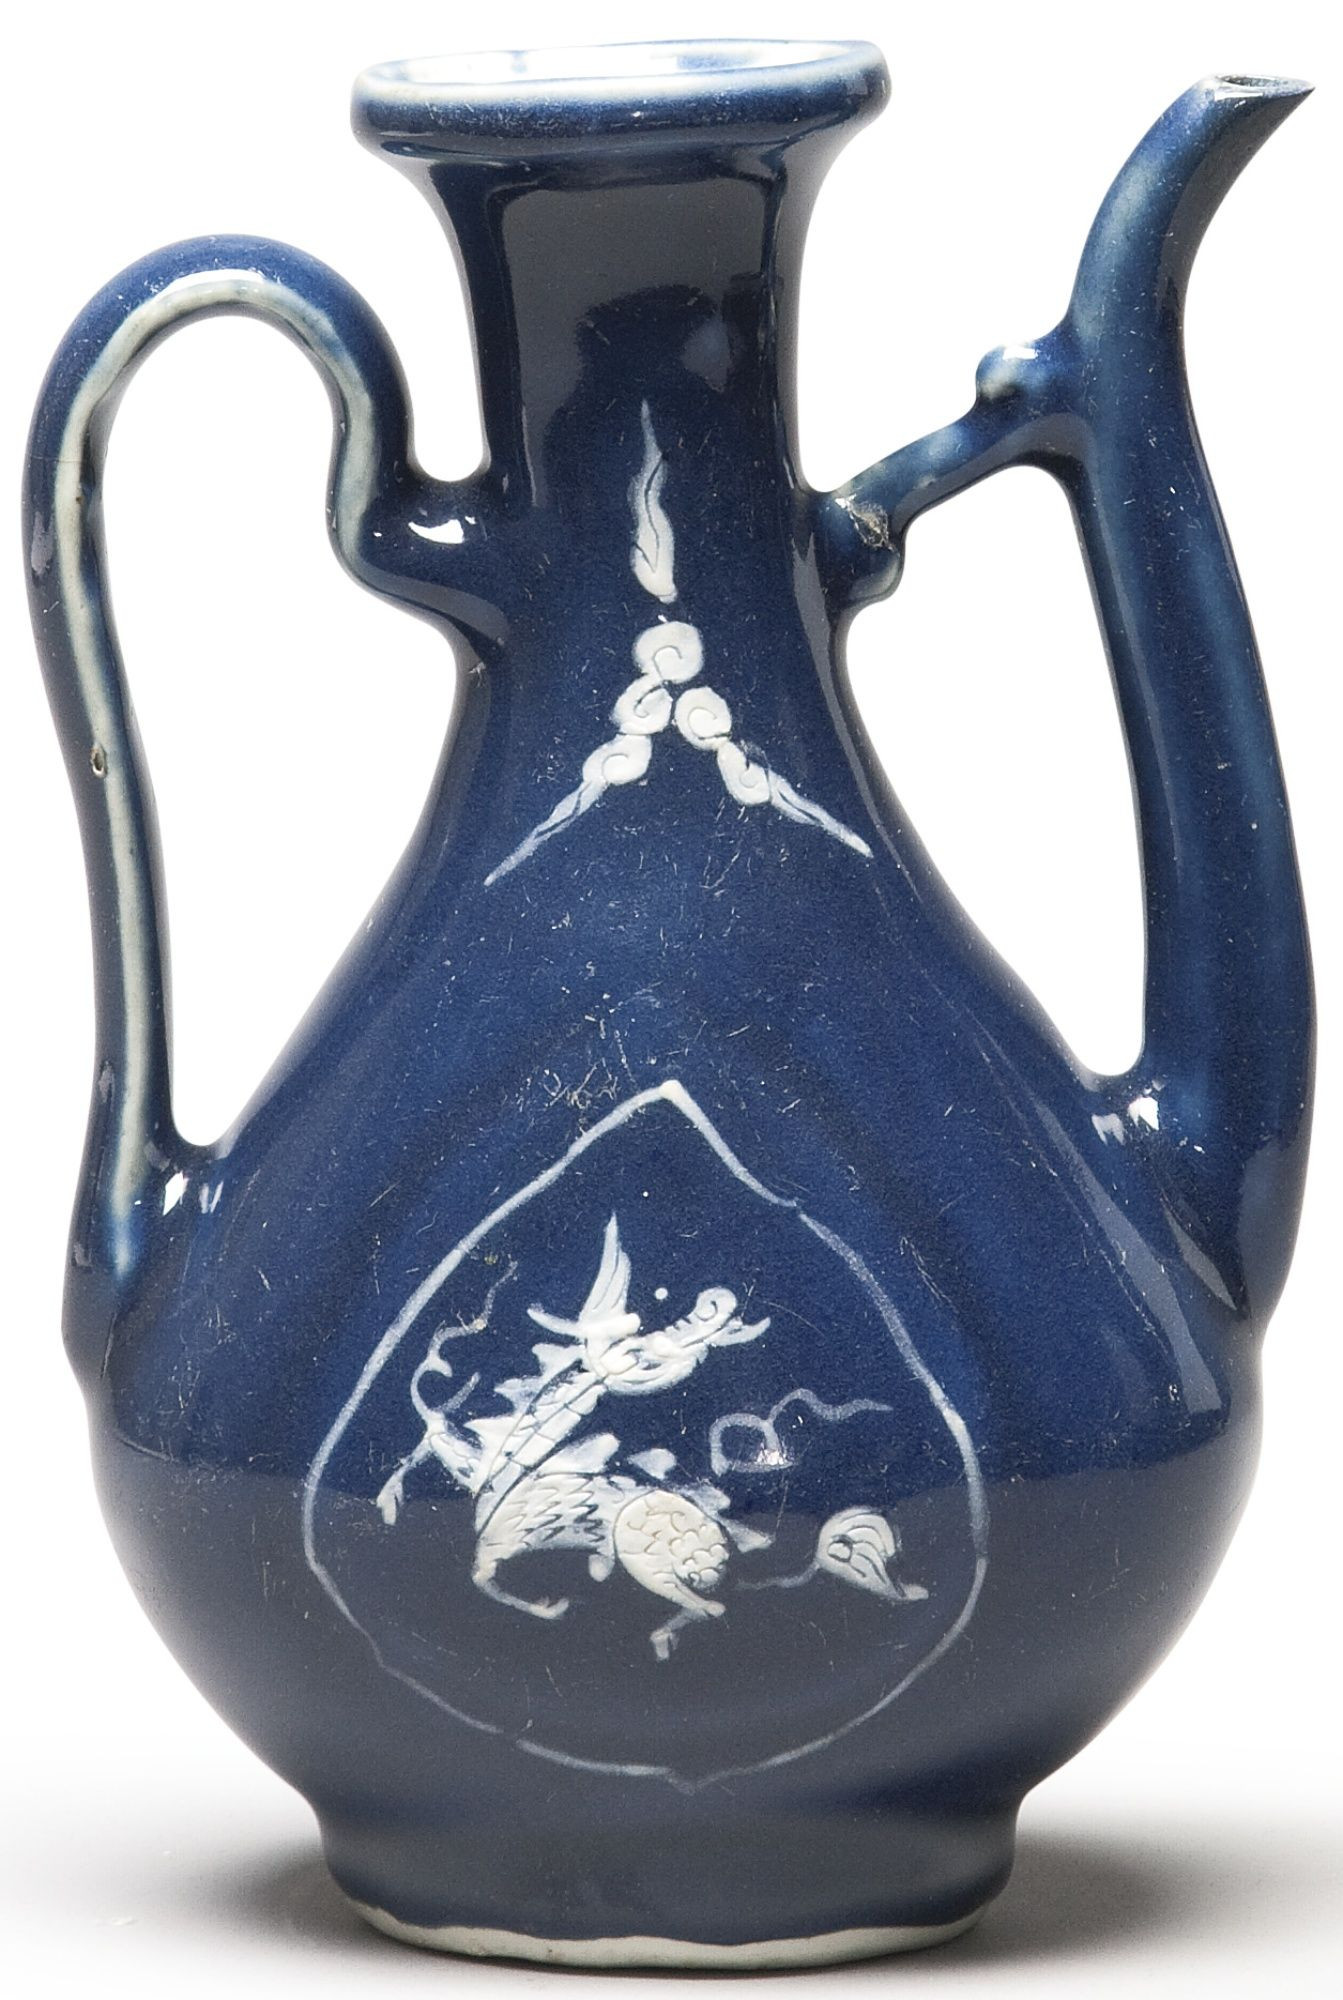 30 Fabulous Ming Vase Markings 2024 free download ming vase markings of a blue glazed and slip decorated ewer late ming dynasty china within a blue glazed and slip decorated ewer late ming dynasty